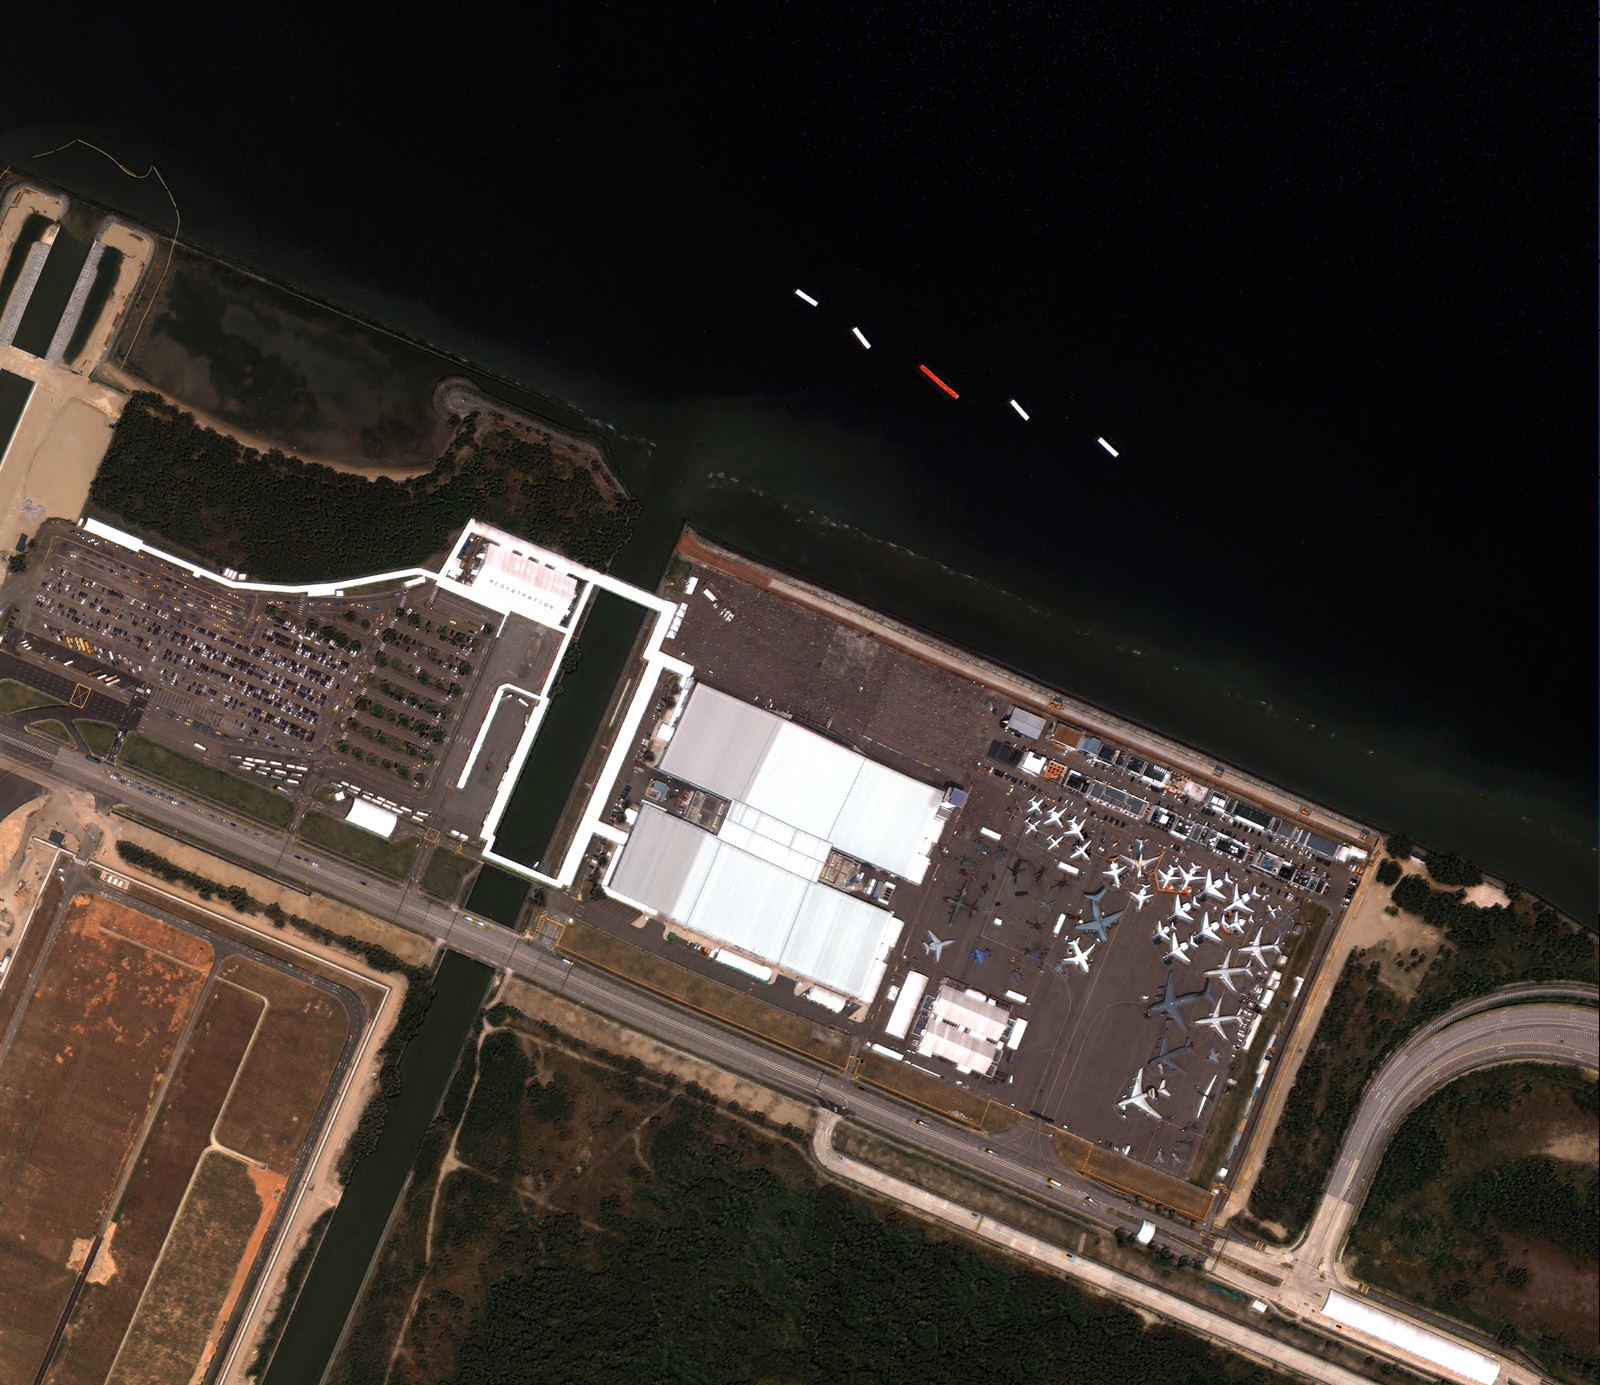 LiveEO satellite view of an airport